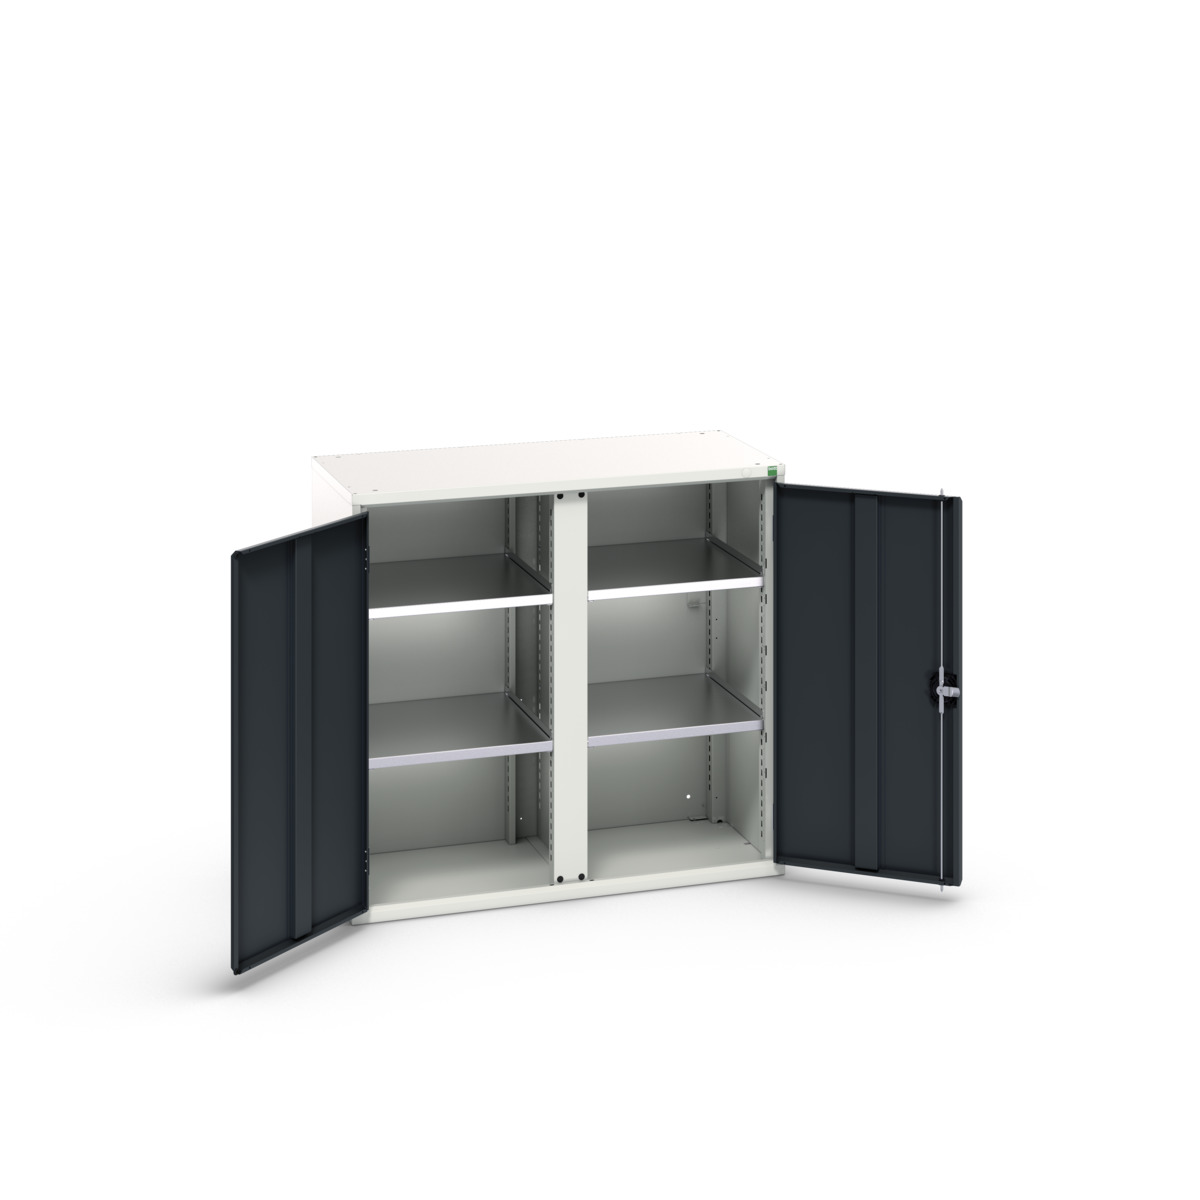 16926555.19 - verso kitted cupboard